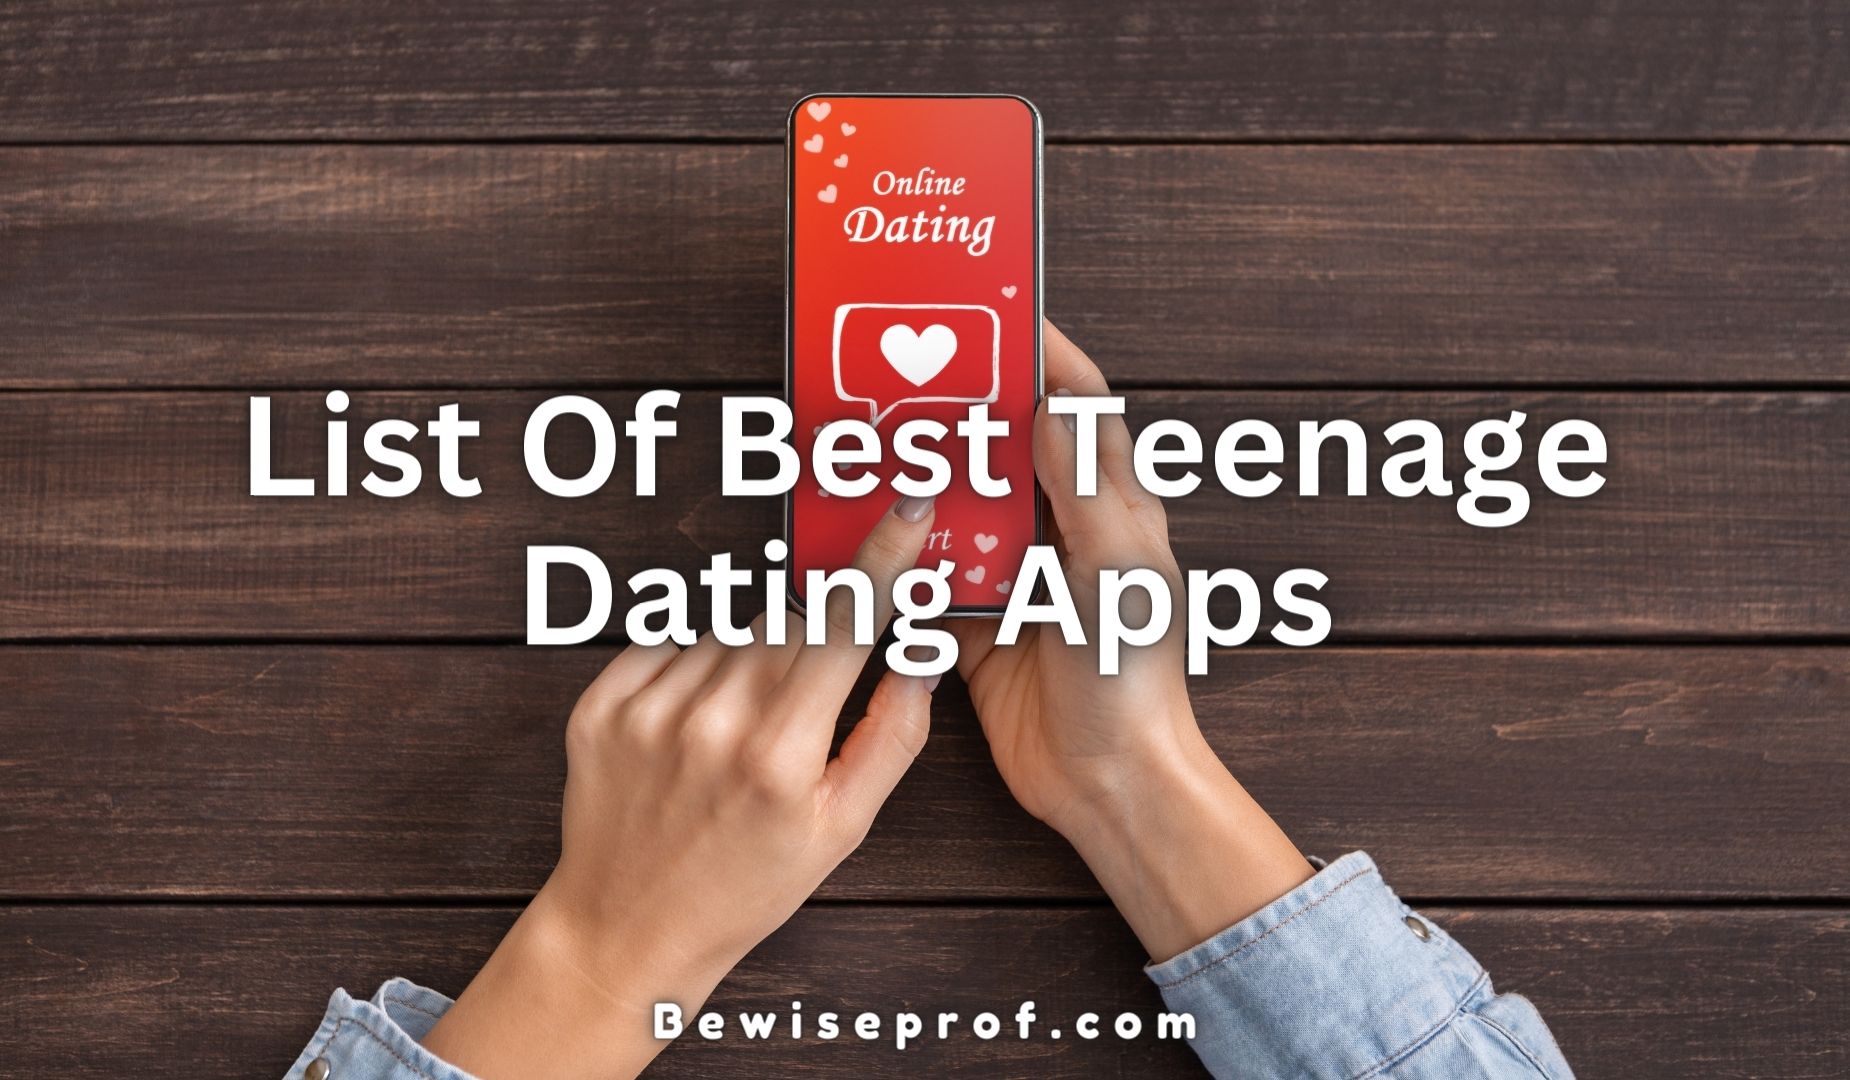 List Of Best Teenage Dating Apps